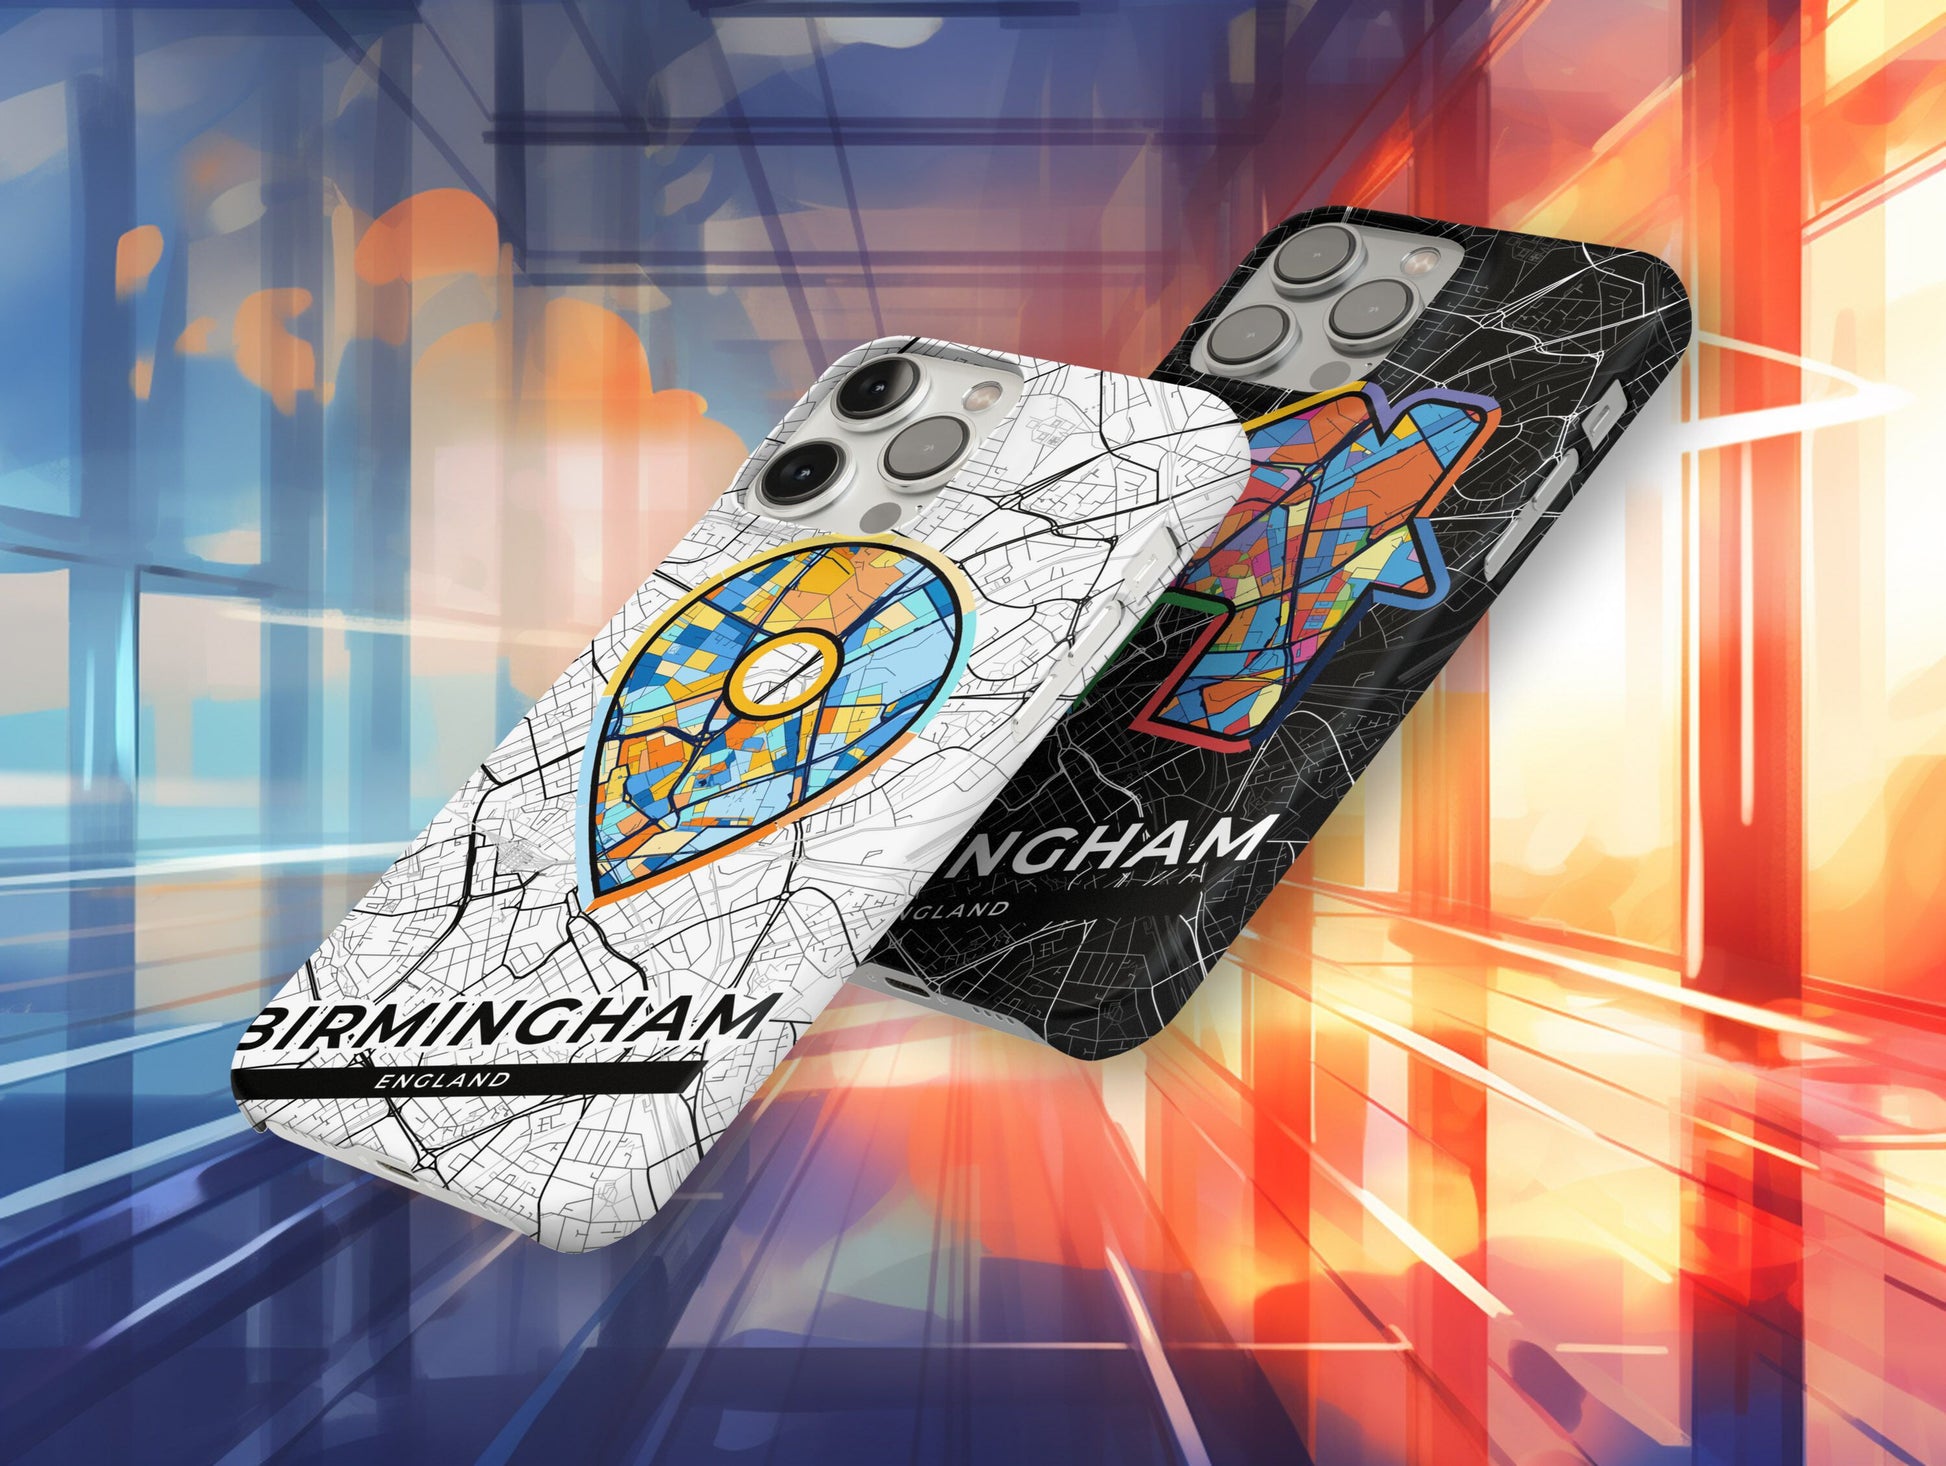 Birmingham England slim phone case with colorful icon. Birthday, wedding or housewarming gift. Couple match cases.